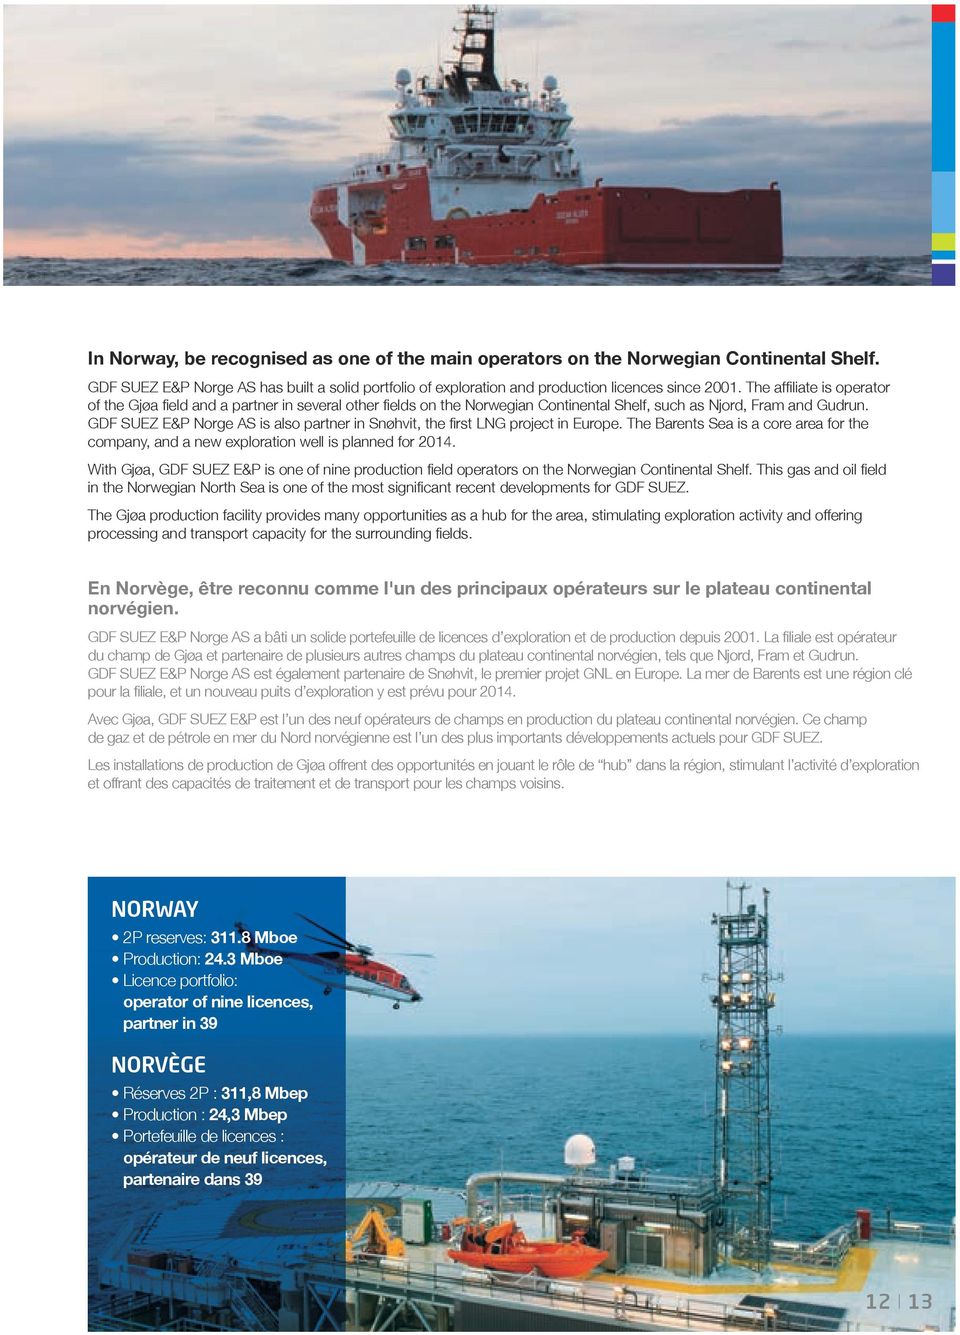 GDF SUEZ E&P Norge AS is also partner in Snøhvit, the first LNG project in Europe. The Barents Sea is a core area for the company, and a new exploration well is planned for 2014.